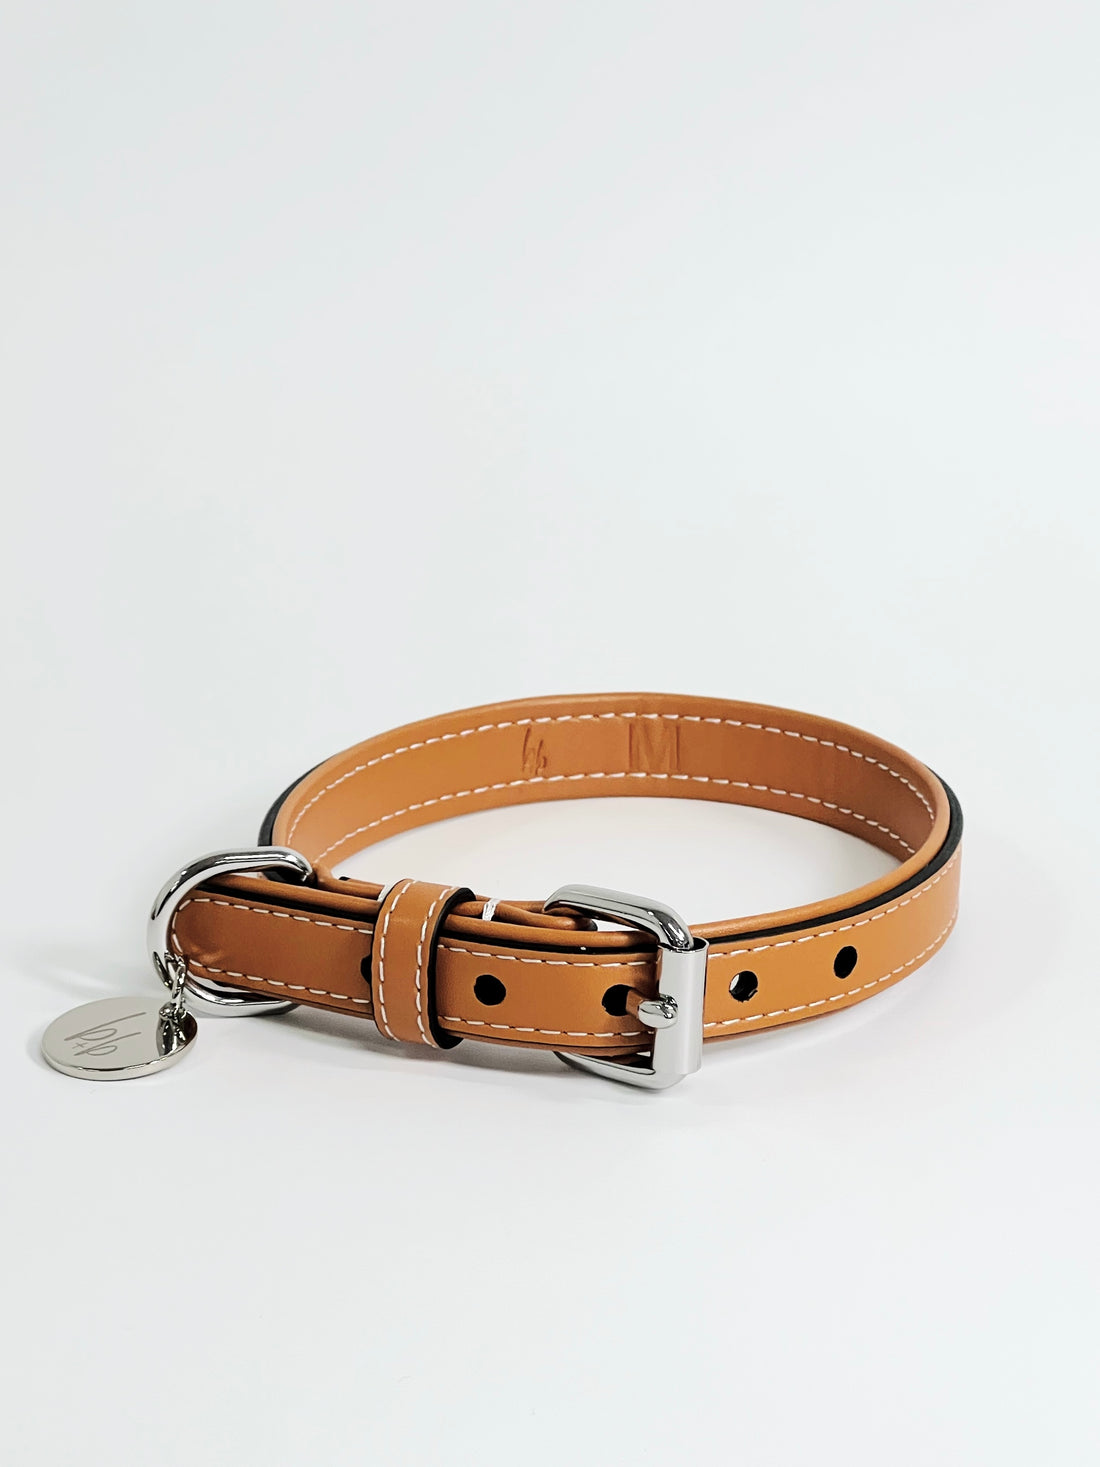 Dog brown leash with buckle lock